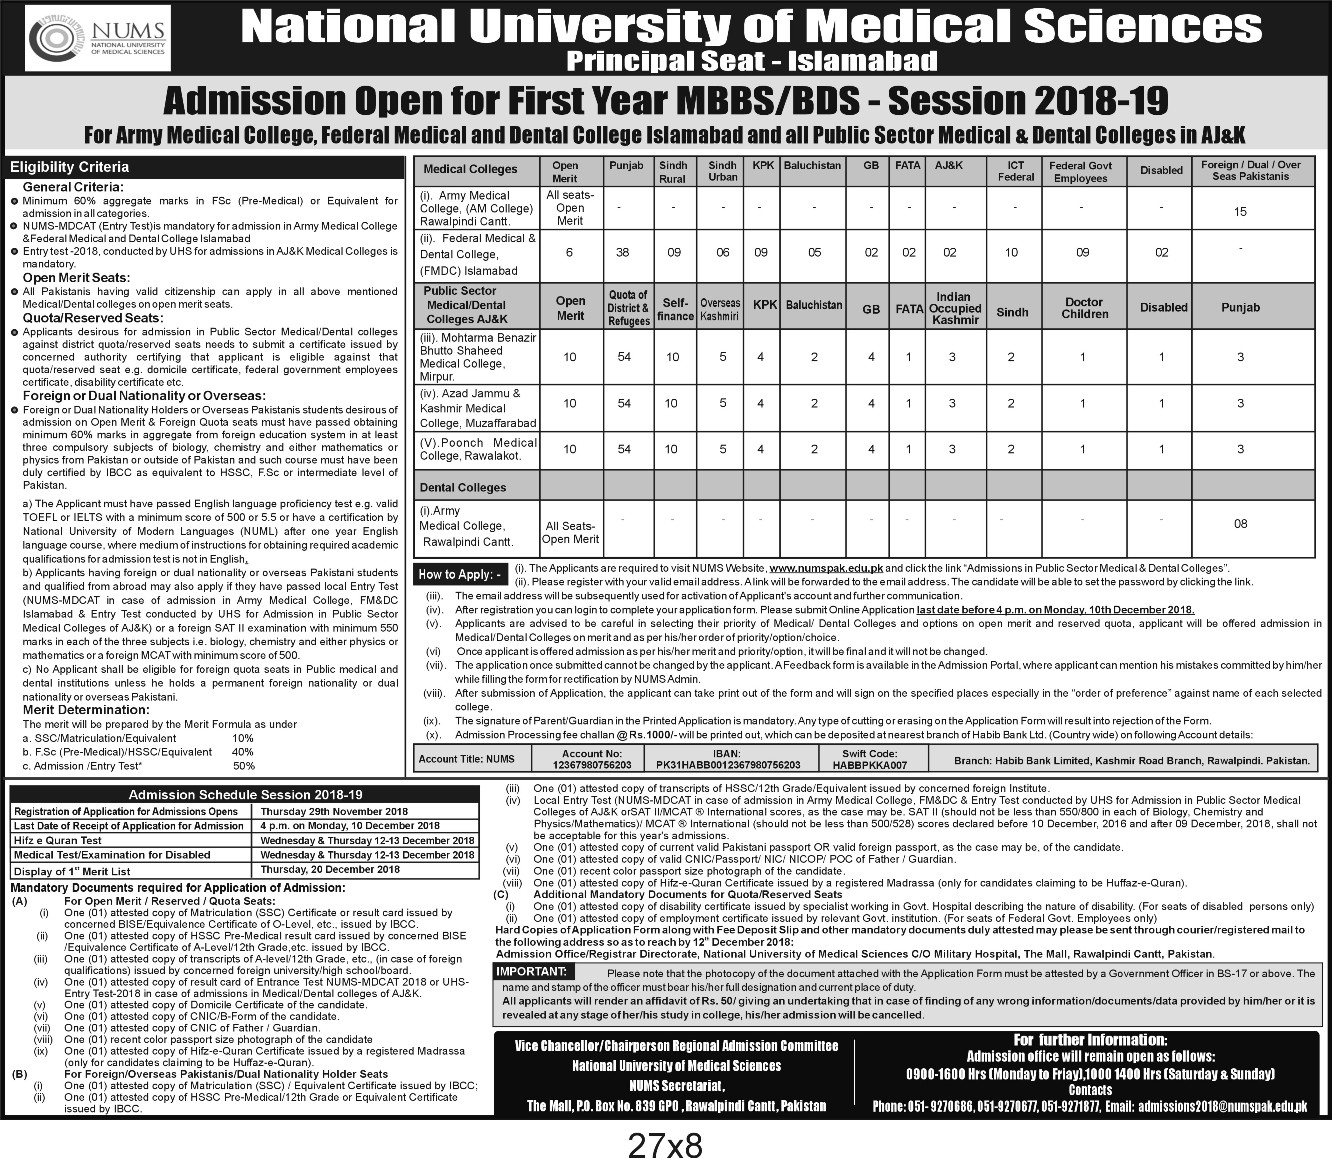 NUMS Announced Admission for AMC FMDC and AJK Medical Colleges 2018